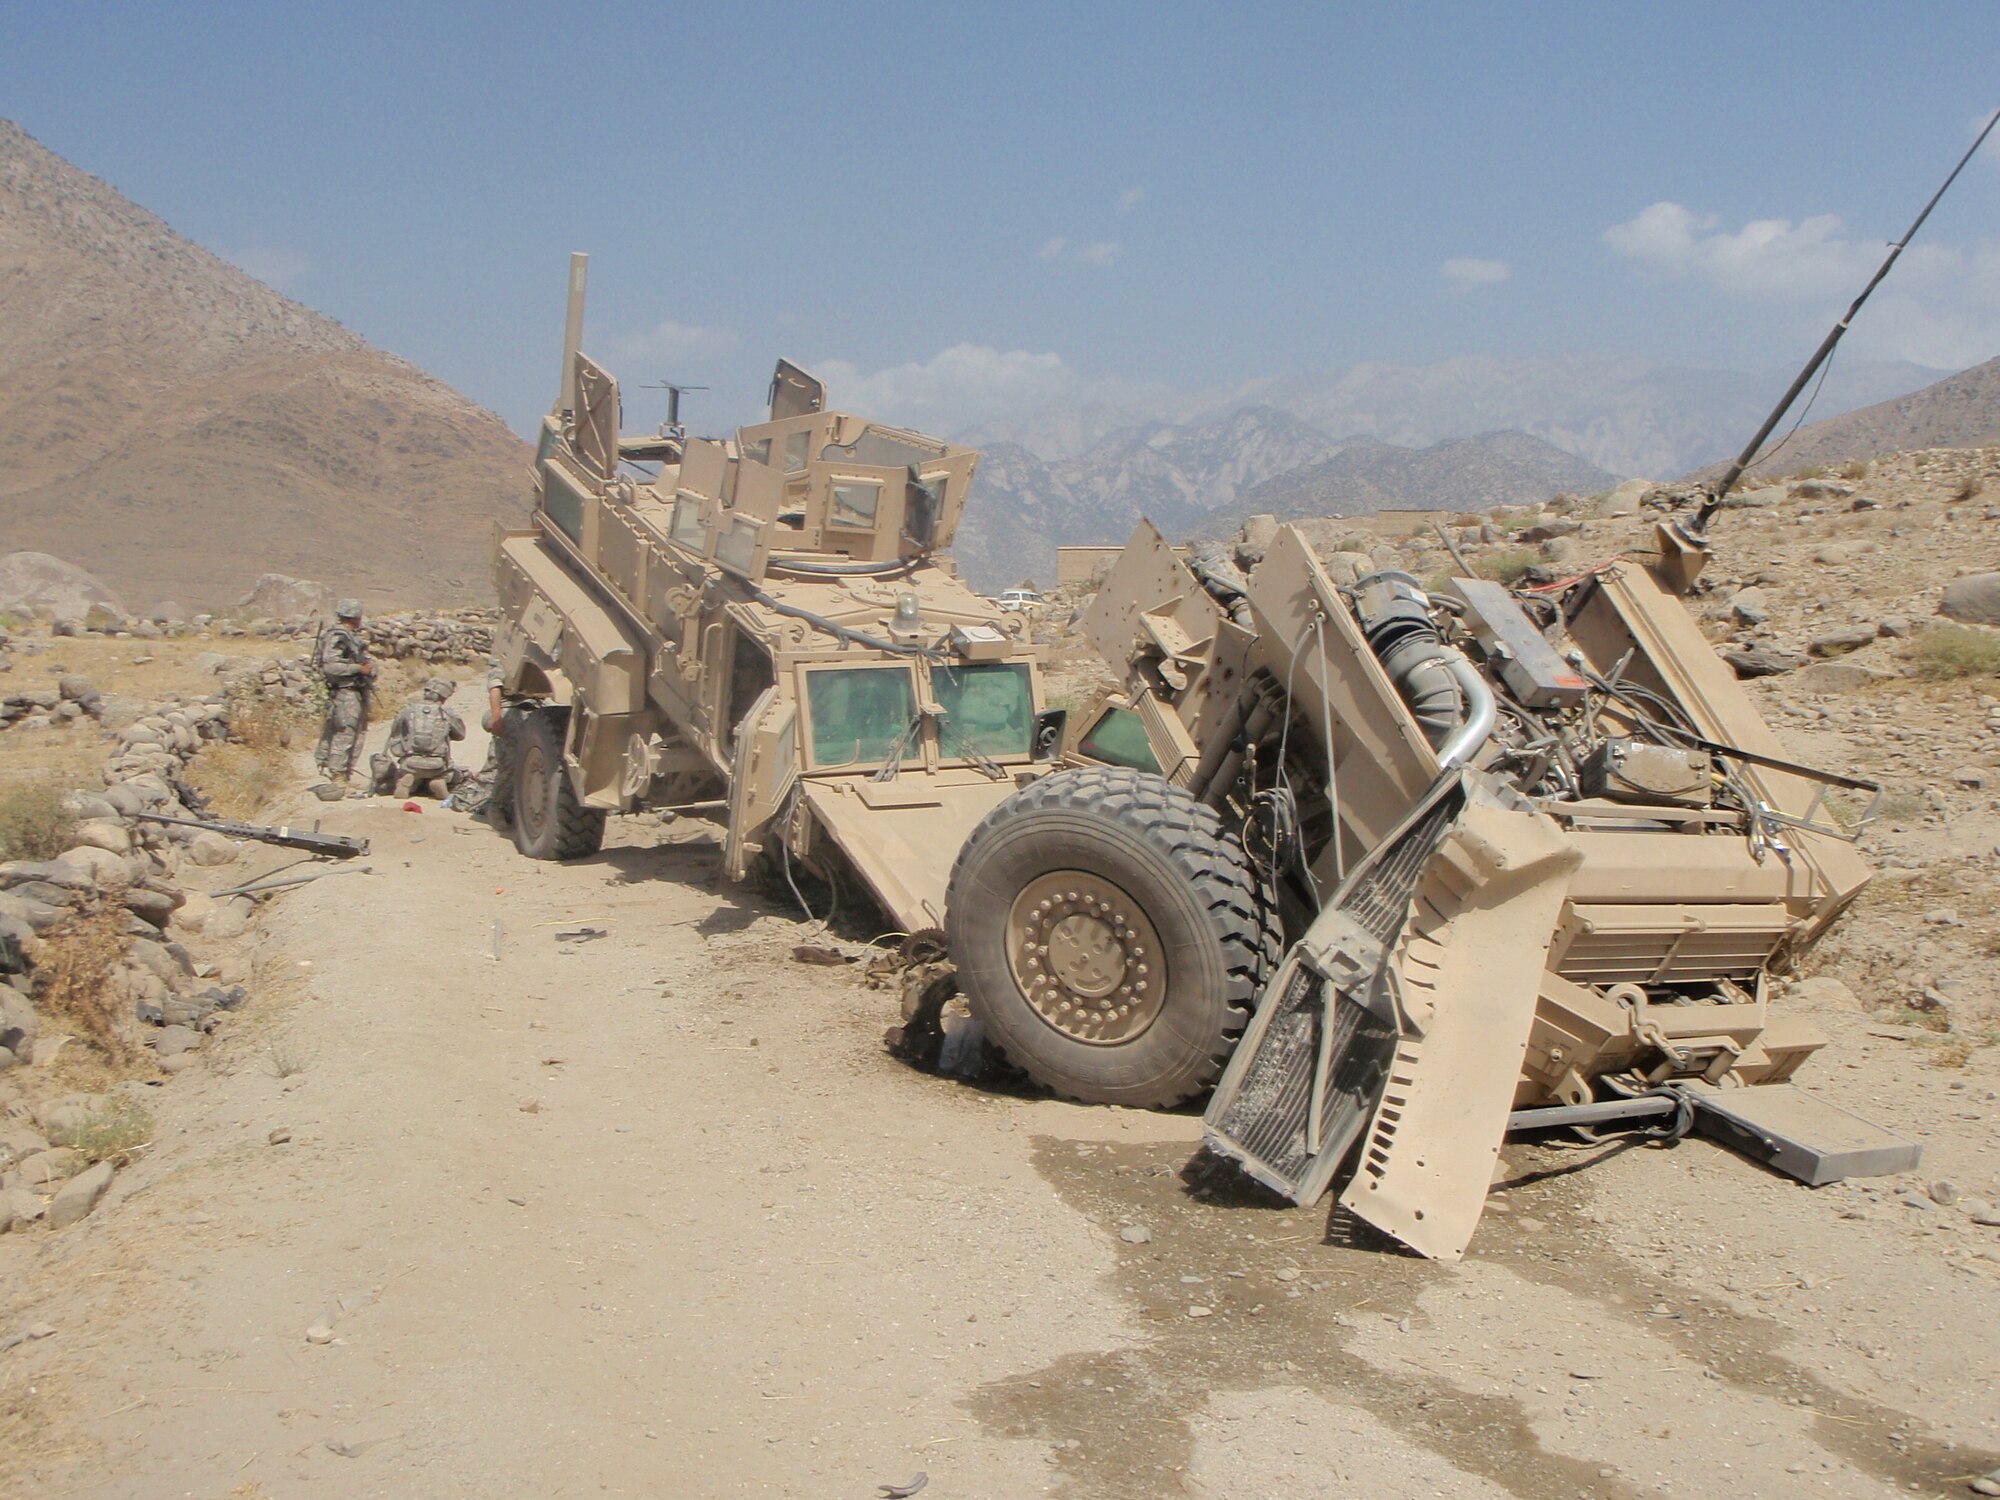 The Mine Resistant Ambush Protected vehicle lies in disarray after being struck by an improvised explosive device while returning from a humanitarian mission to give medical attention to women and children at a small Afghan village Aug. 12. Airman Dowdy was able to perform life-saving aid to injured Soldiers who were also on the convoy mission. (U.S. Air Force photo by Airman 1st Class Destiney Dowdy)